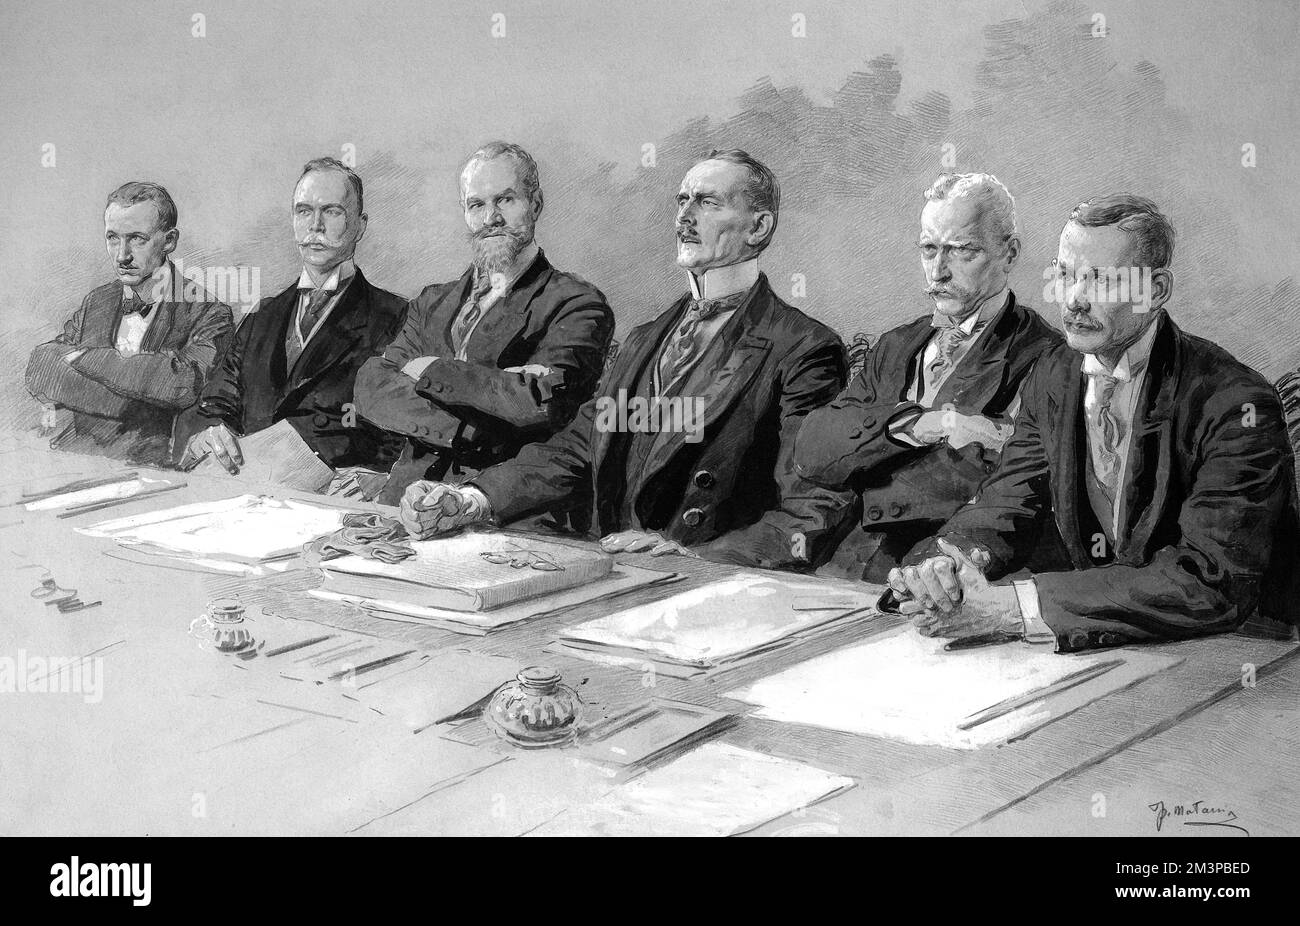 The Fate of the German Empire. The German delegates listen to the reading of the Peace Terms.  They are: Dr Melchior; Herr Leinert (President of the Assembly), Dr Landsberg (Minister of Justice), Count Brockdorff-Rantzau, Herr Giesberts (Minister of Posts), and Professor Schucking (Professor of International Law).      Date: 1919 Stock Photo